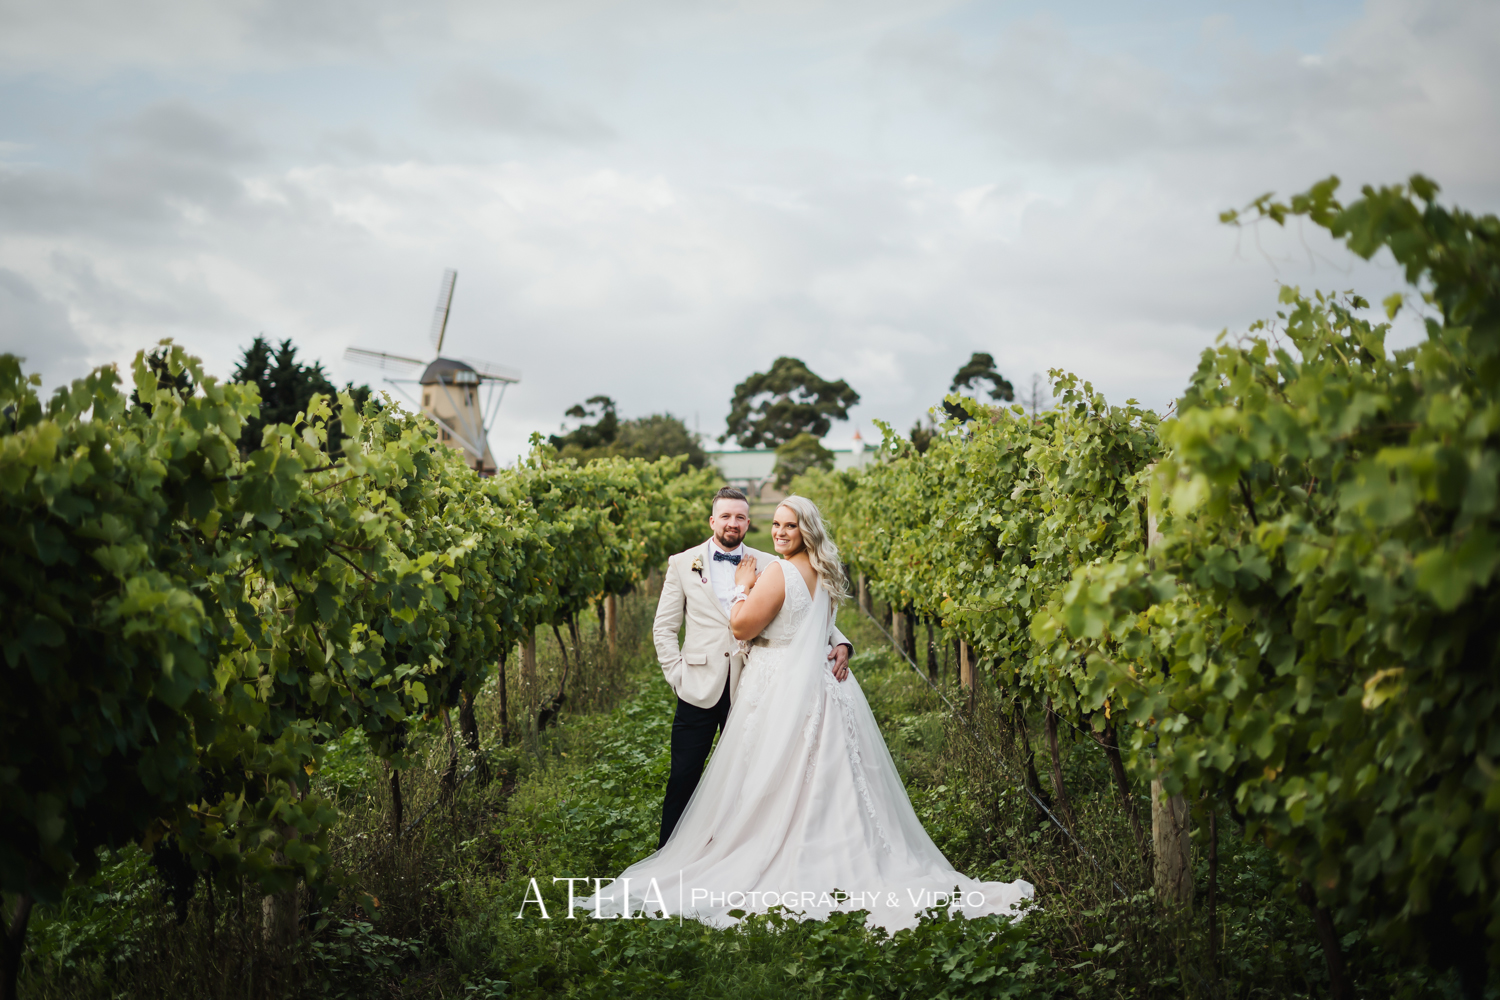 , Witchmount Winery Wedding Photography Plumpton by ATEIA Photography &#038; Video